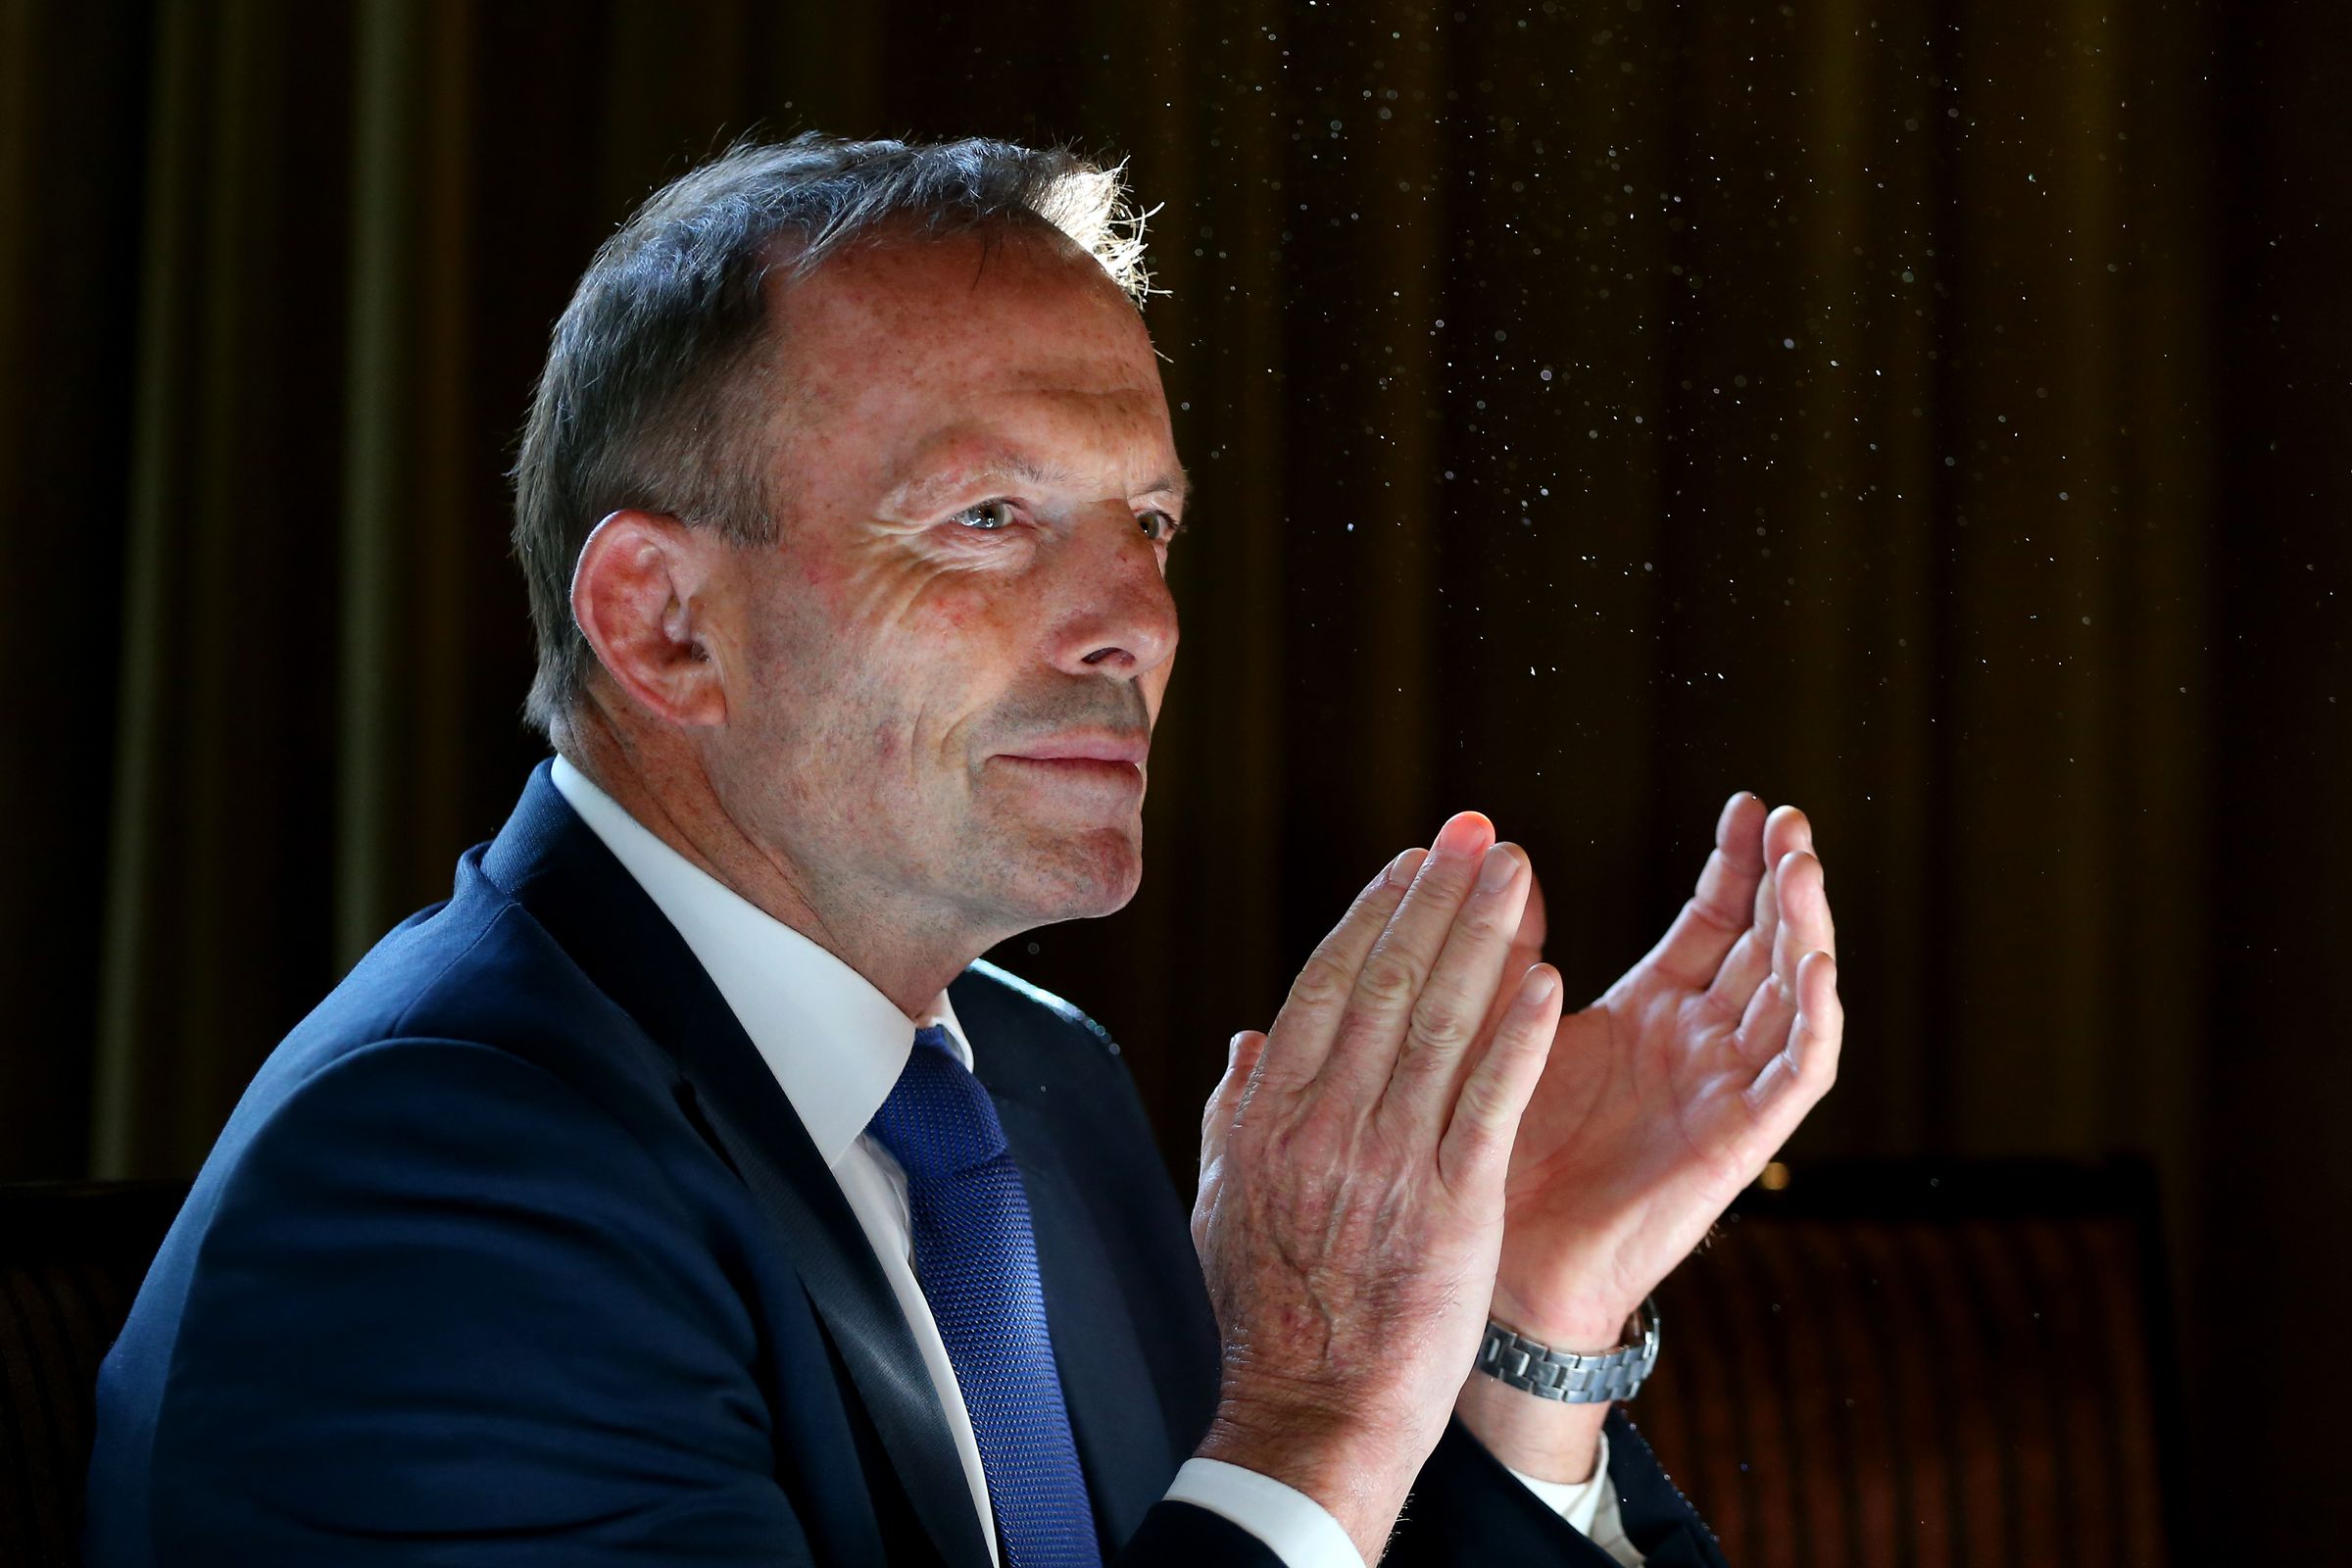 Tony Abbott clapping at a book launch